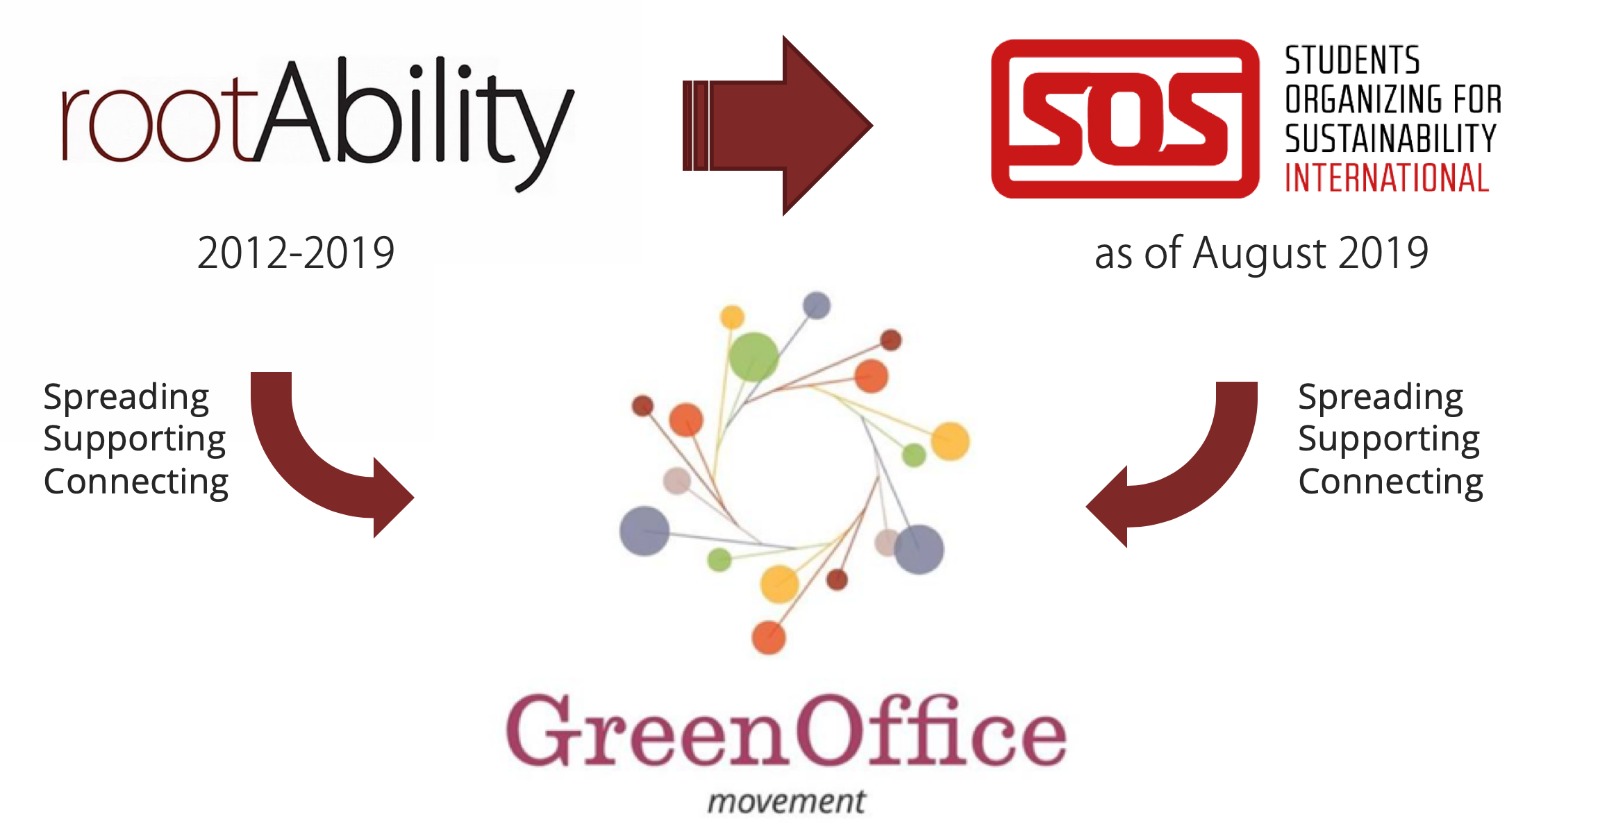 rootAbility and the Green Office Movement become part of Students Organizing for Sustainability (SOS)